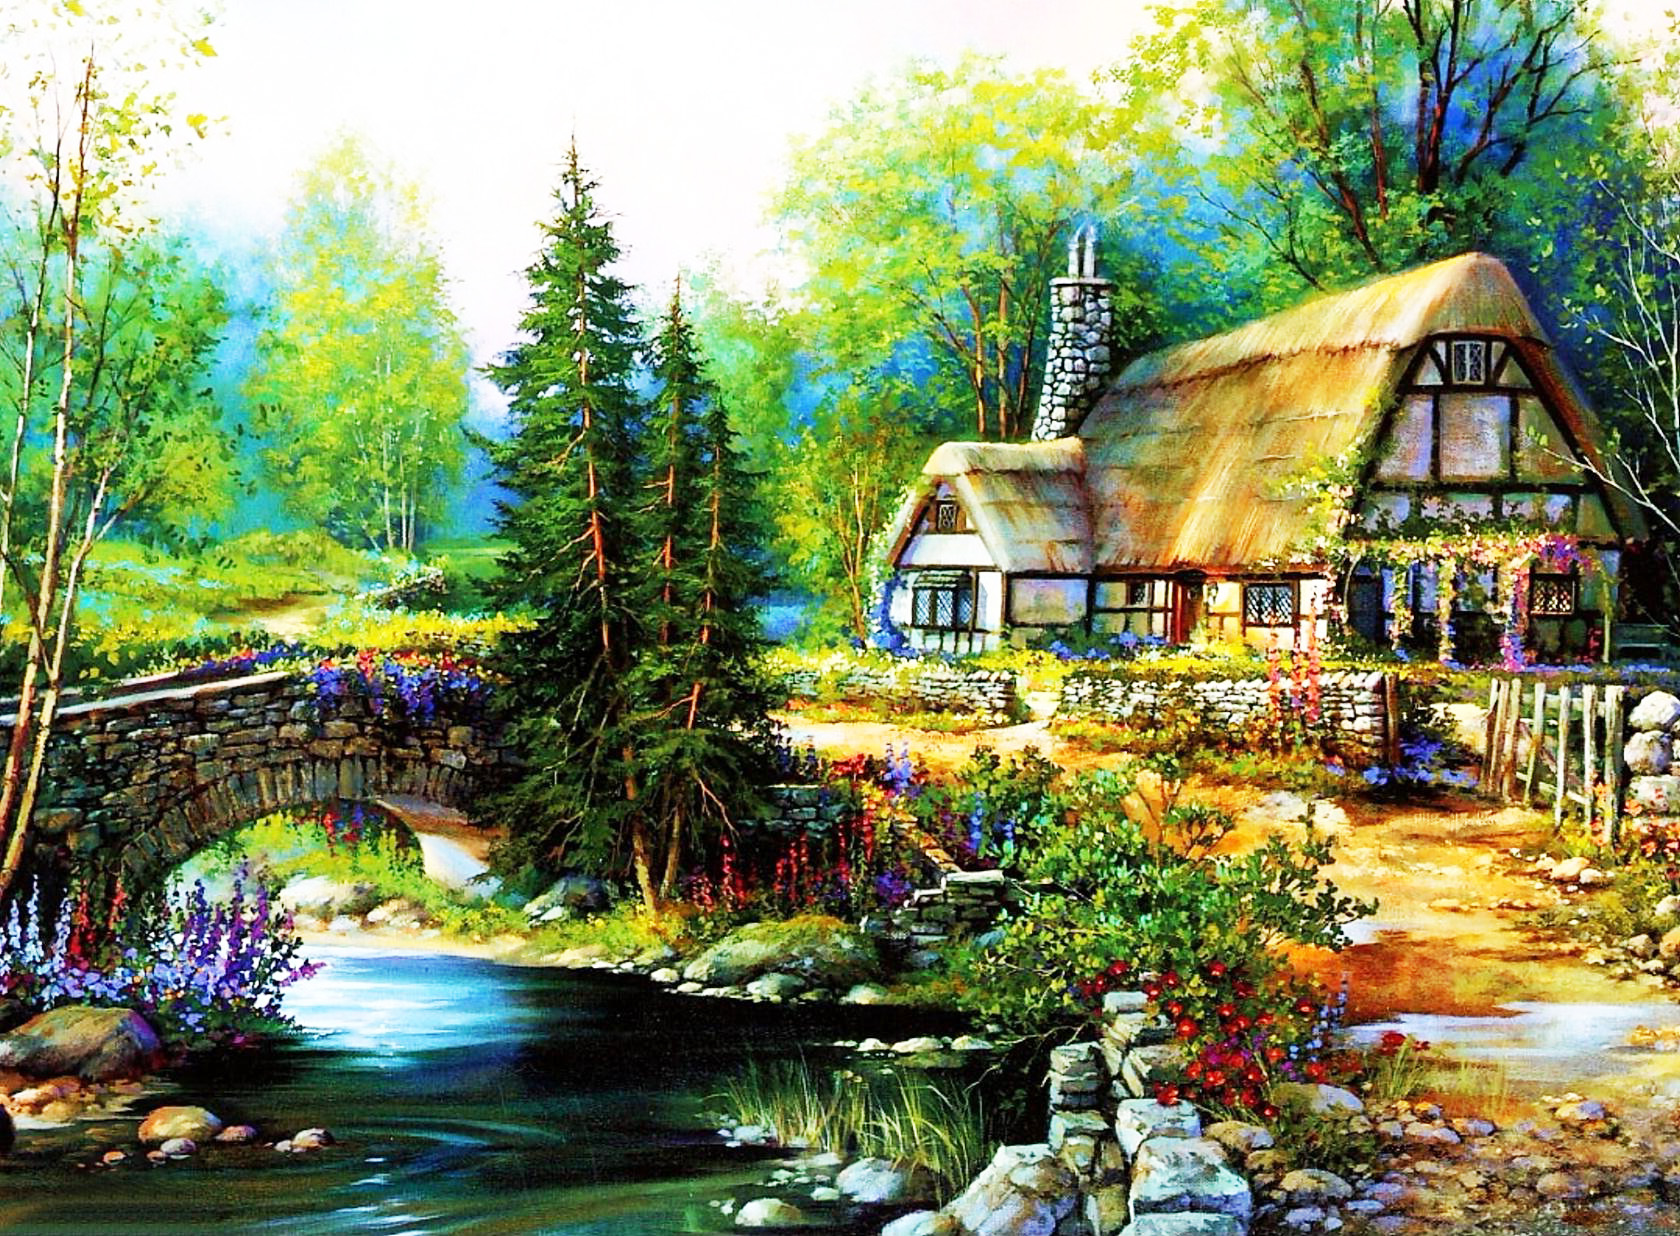 Cottage Wallpapers and Background Images   stmednet